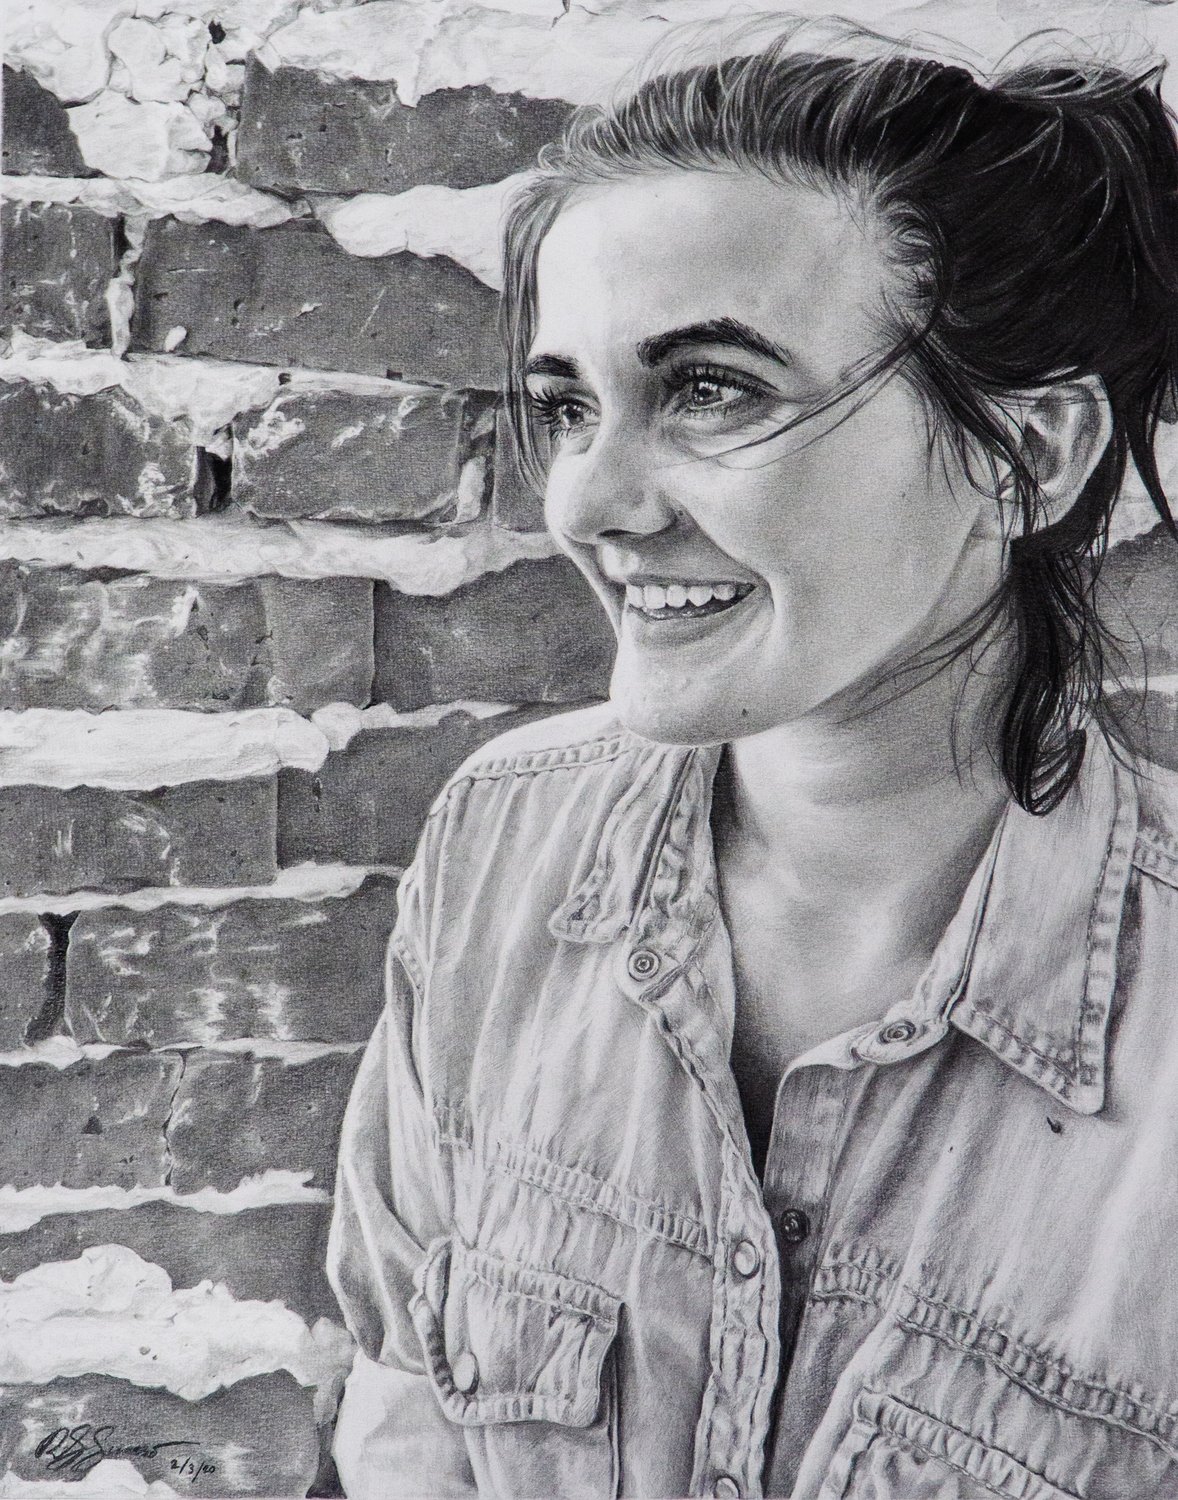 Rachel Swasso’s work “Capturing Laughter” earned a Gold Seal at the 2020 Visual Arts Scholastic Event and will be part of a traveling exhibit throughout the state.